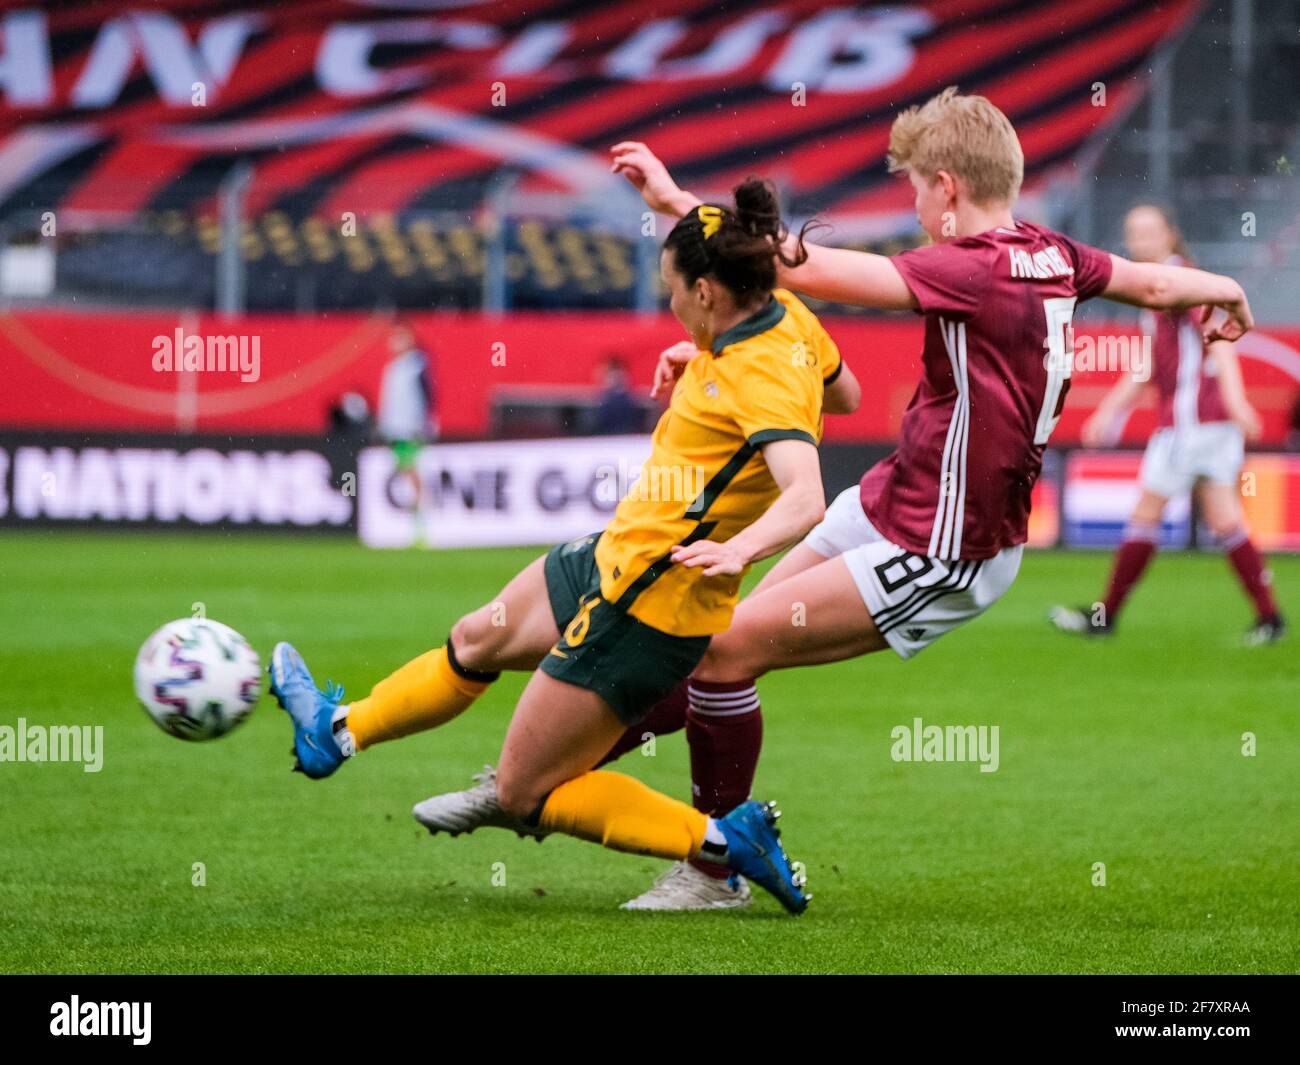 Hayley Raso (16 Australia ) goes for the ball during a tackle during the International Friendly match between Germany and Australia at the Brita-Arena in Wiesbaden Germany. Stock Photo